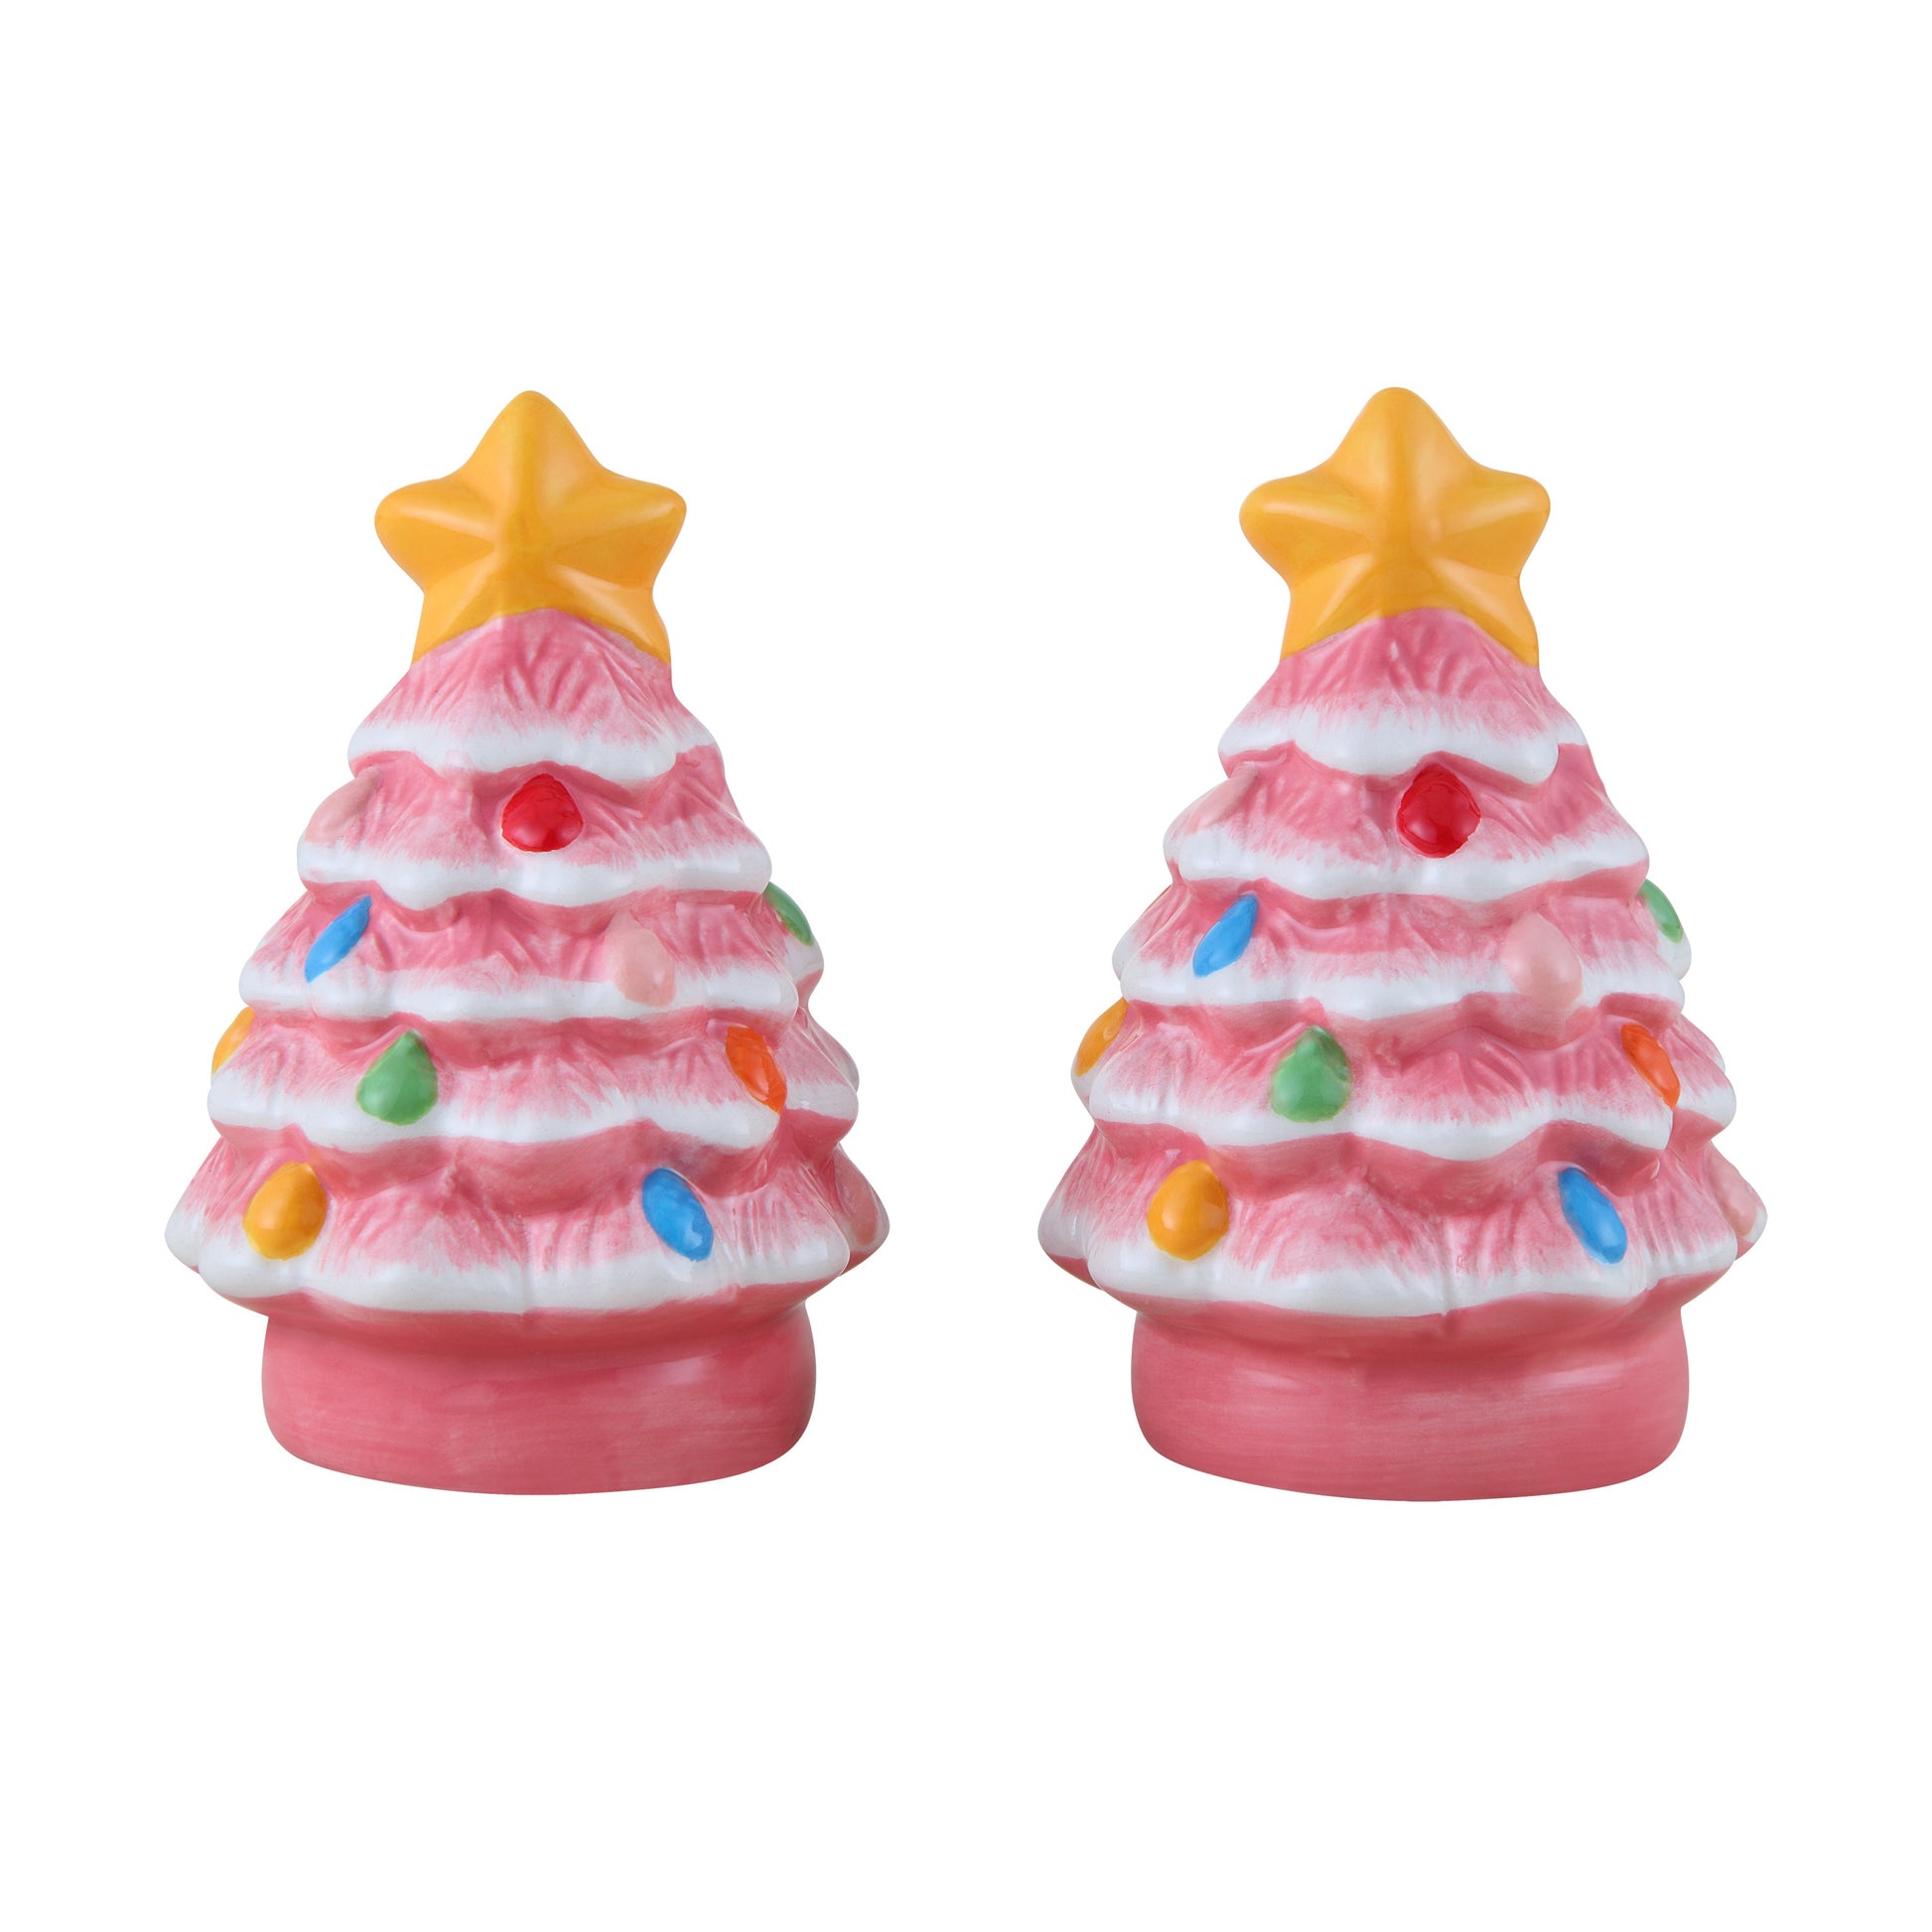 Salt and Pepper Shakers Light up Christmas Ornament Christmas Decorations 